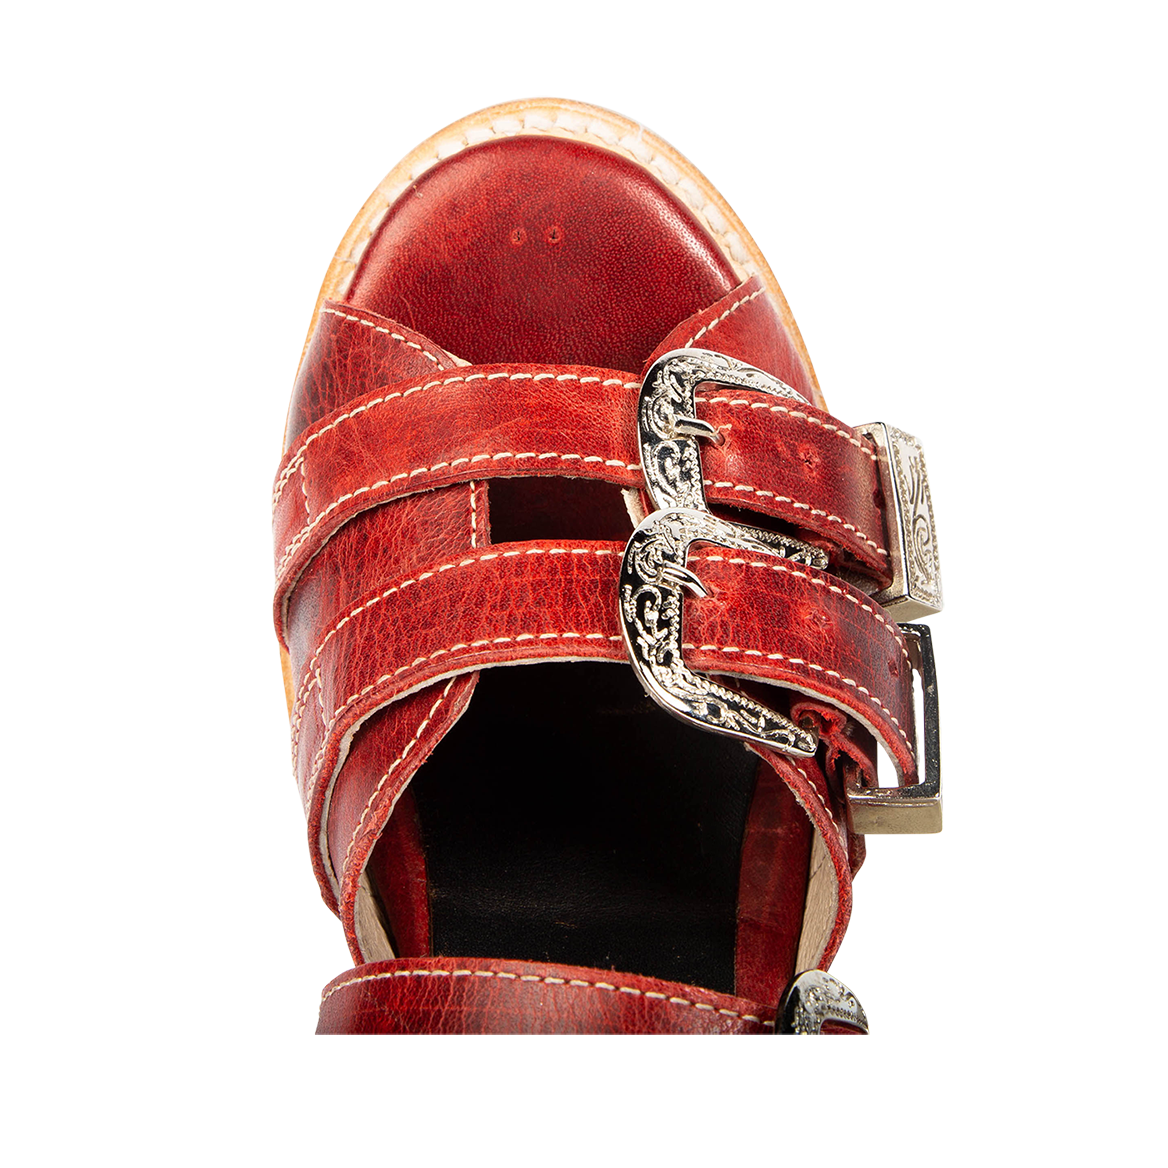 Top view showing round toe and metal buckles on FREEBIRD women's Brooklynn red sandal